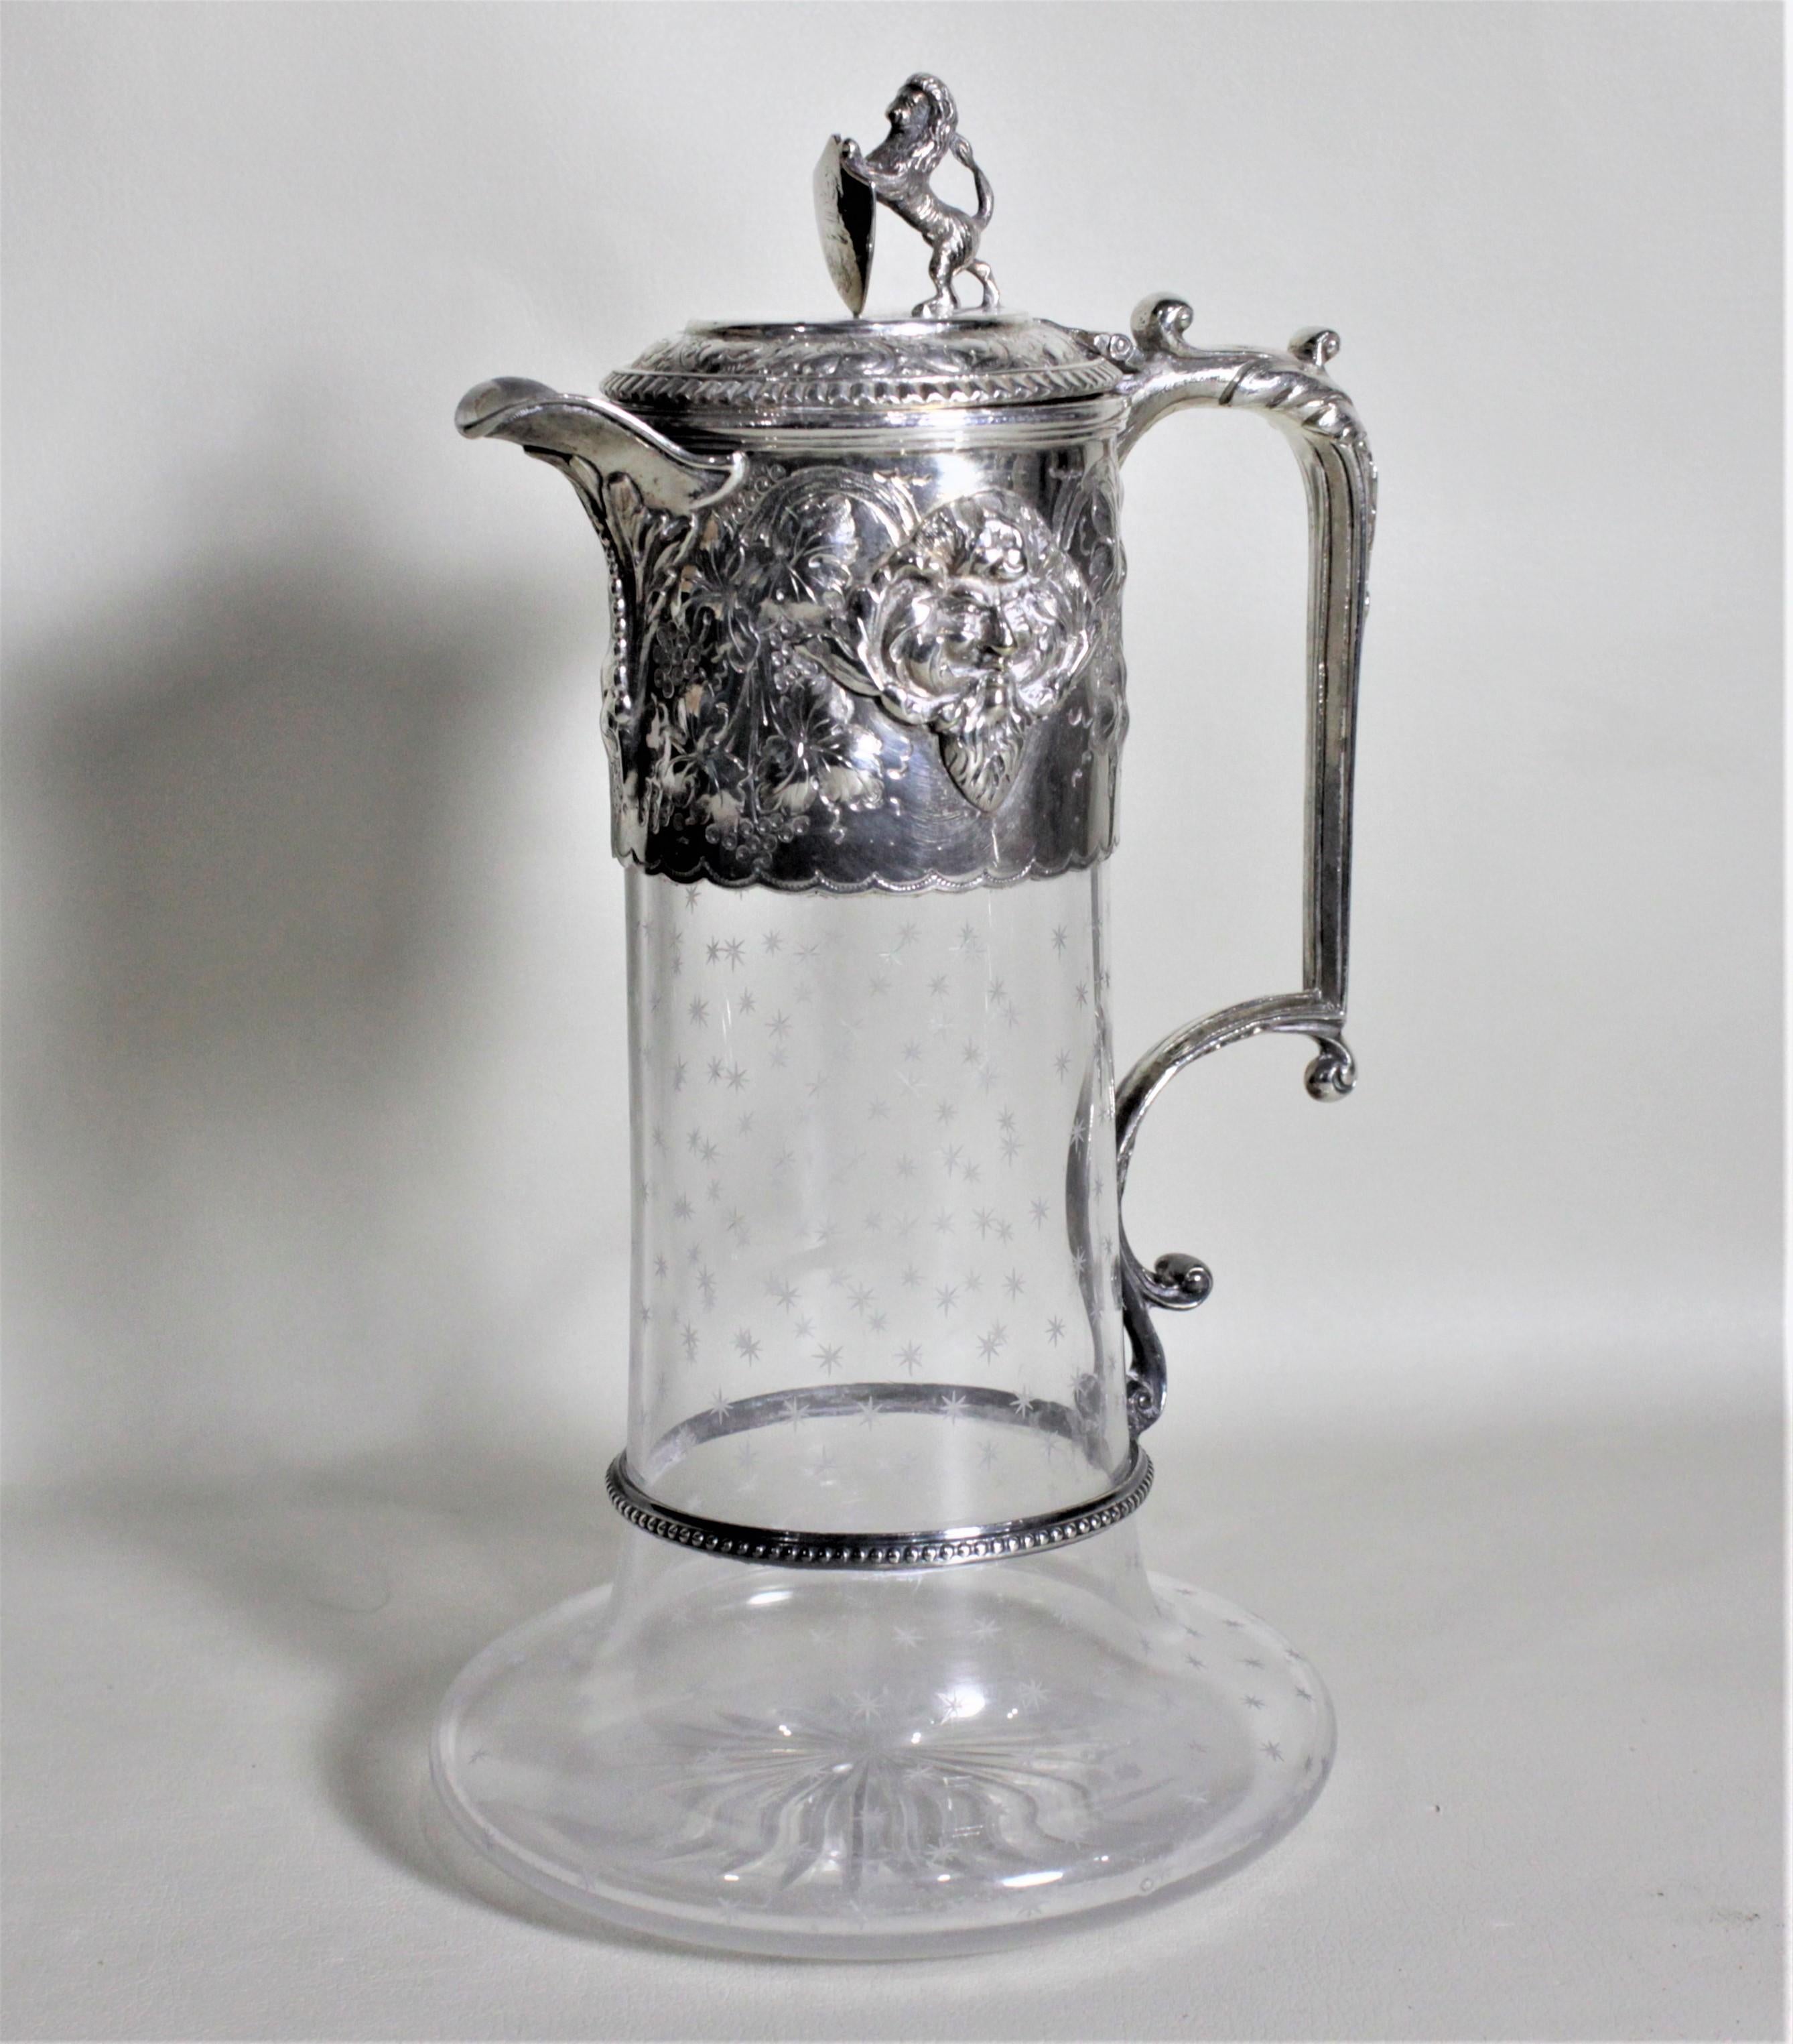 This antique silver plate and cut crystal claret jug was most likely made in England in circa 1900 in the Victorian style. The jug features a standing figural lion holding a shield on the lid and an ornate raised flower and leaf design motif